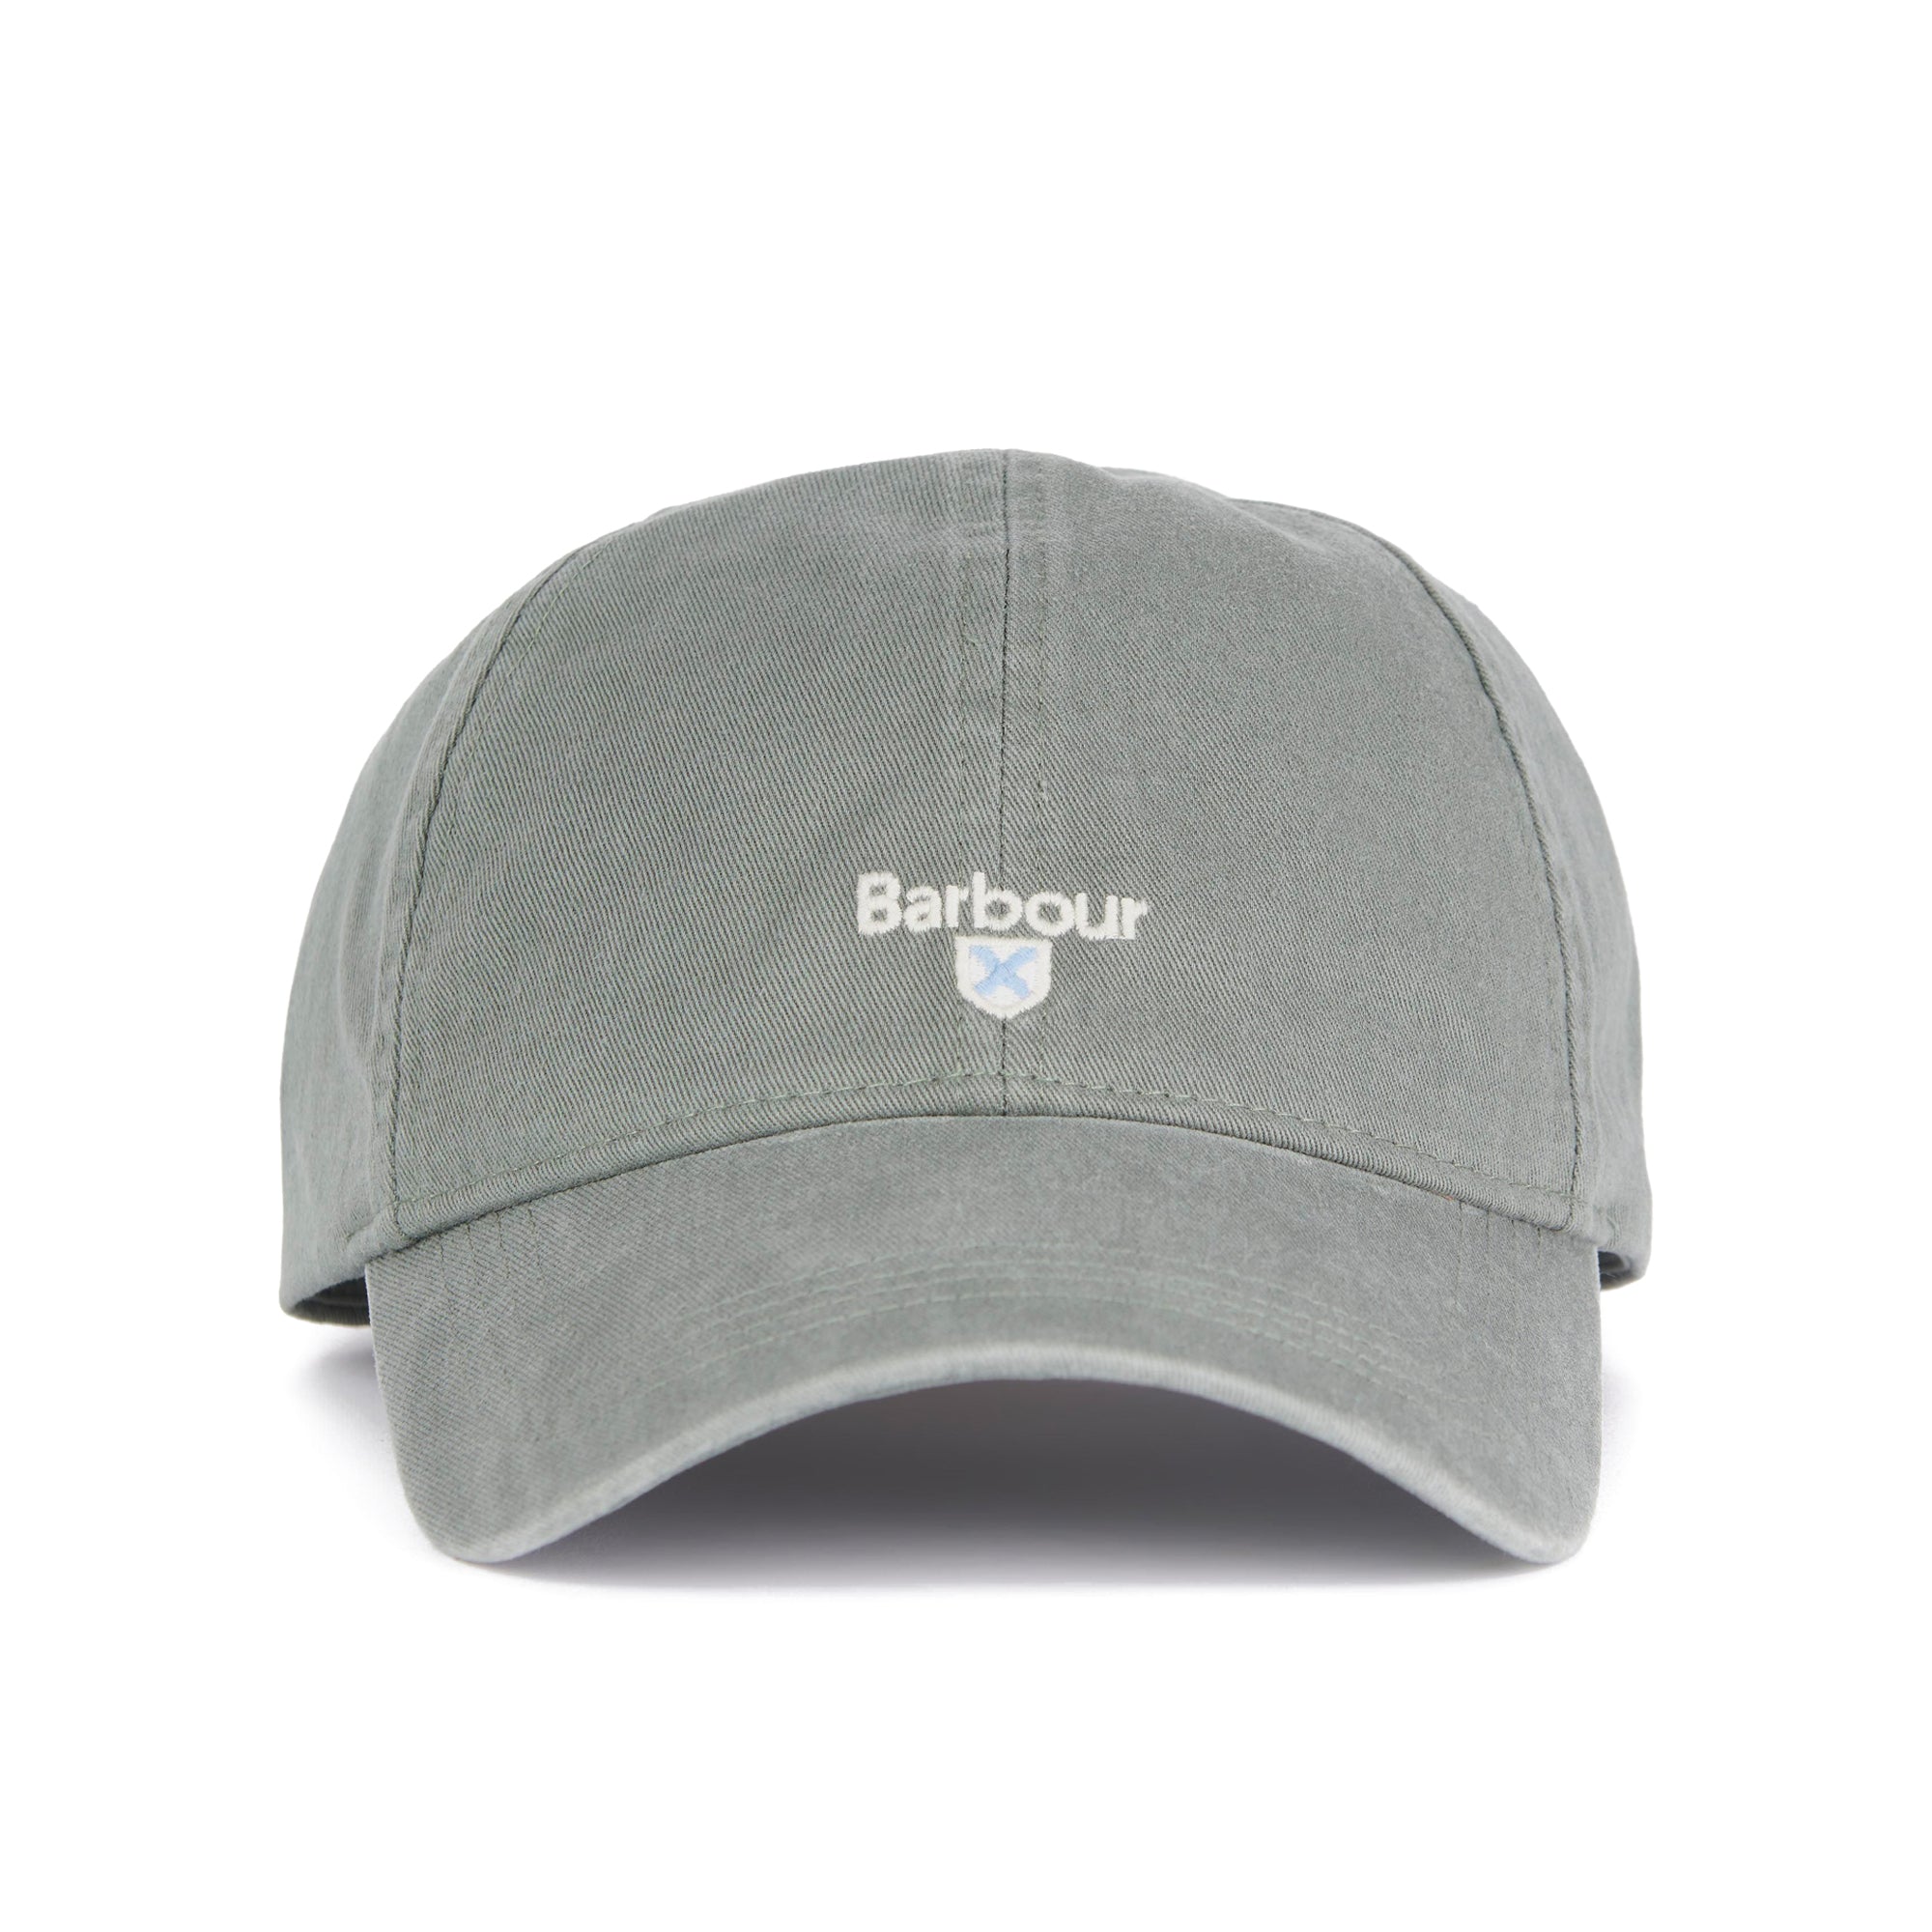 Barbour Cascade Washed Sports Cap - Agave Green